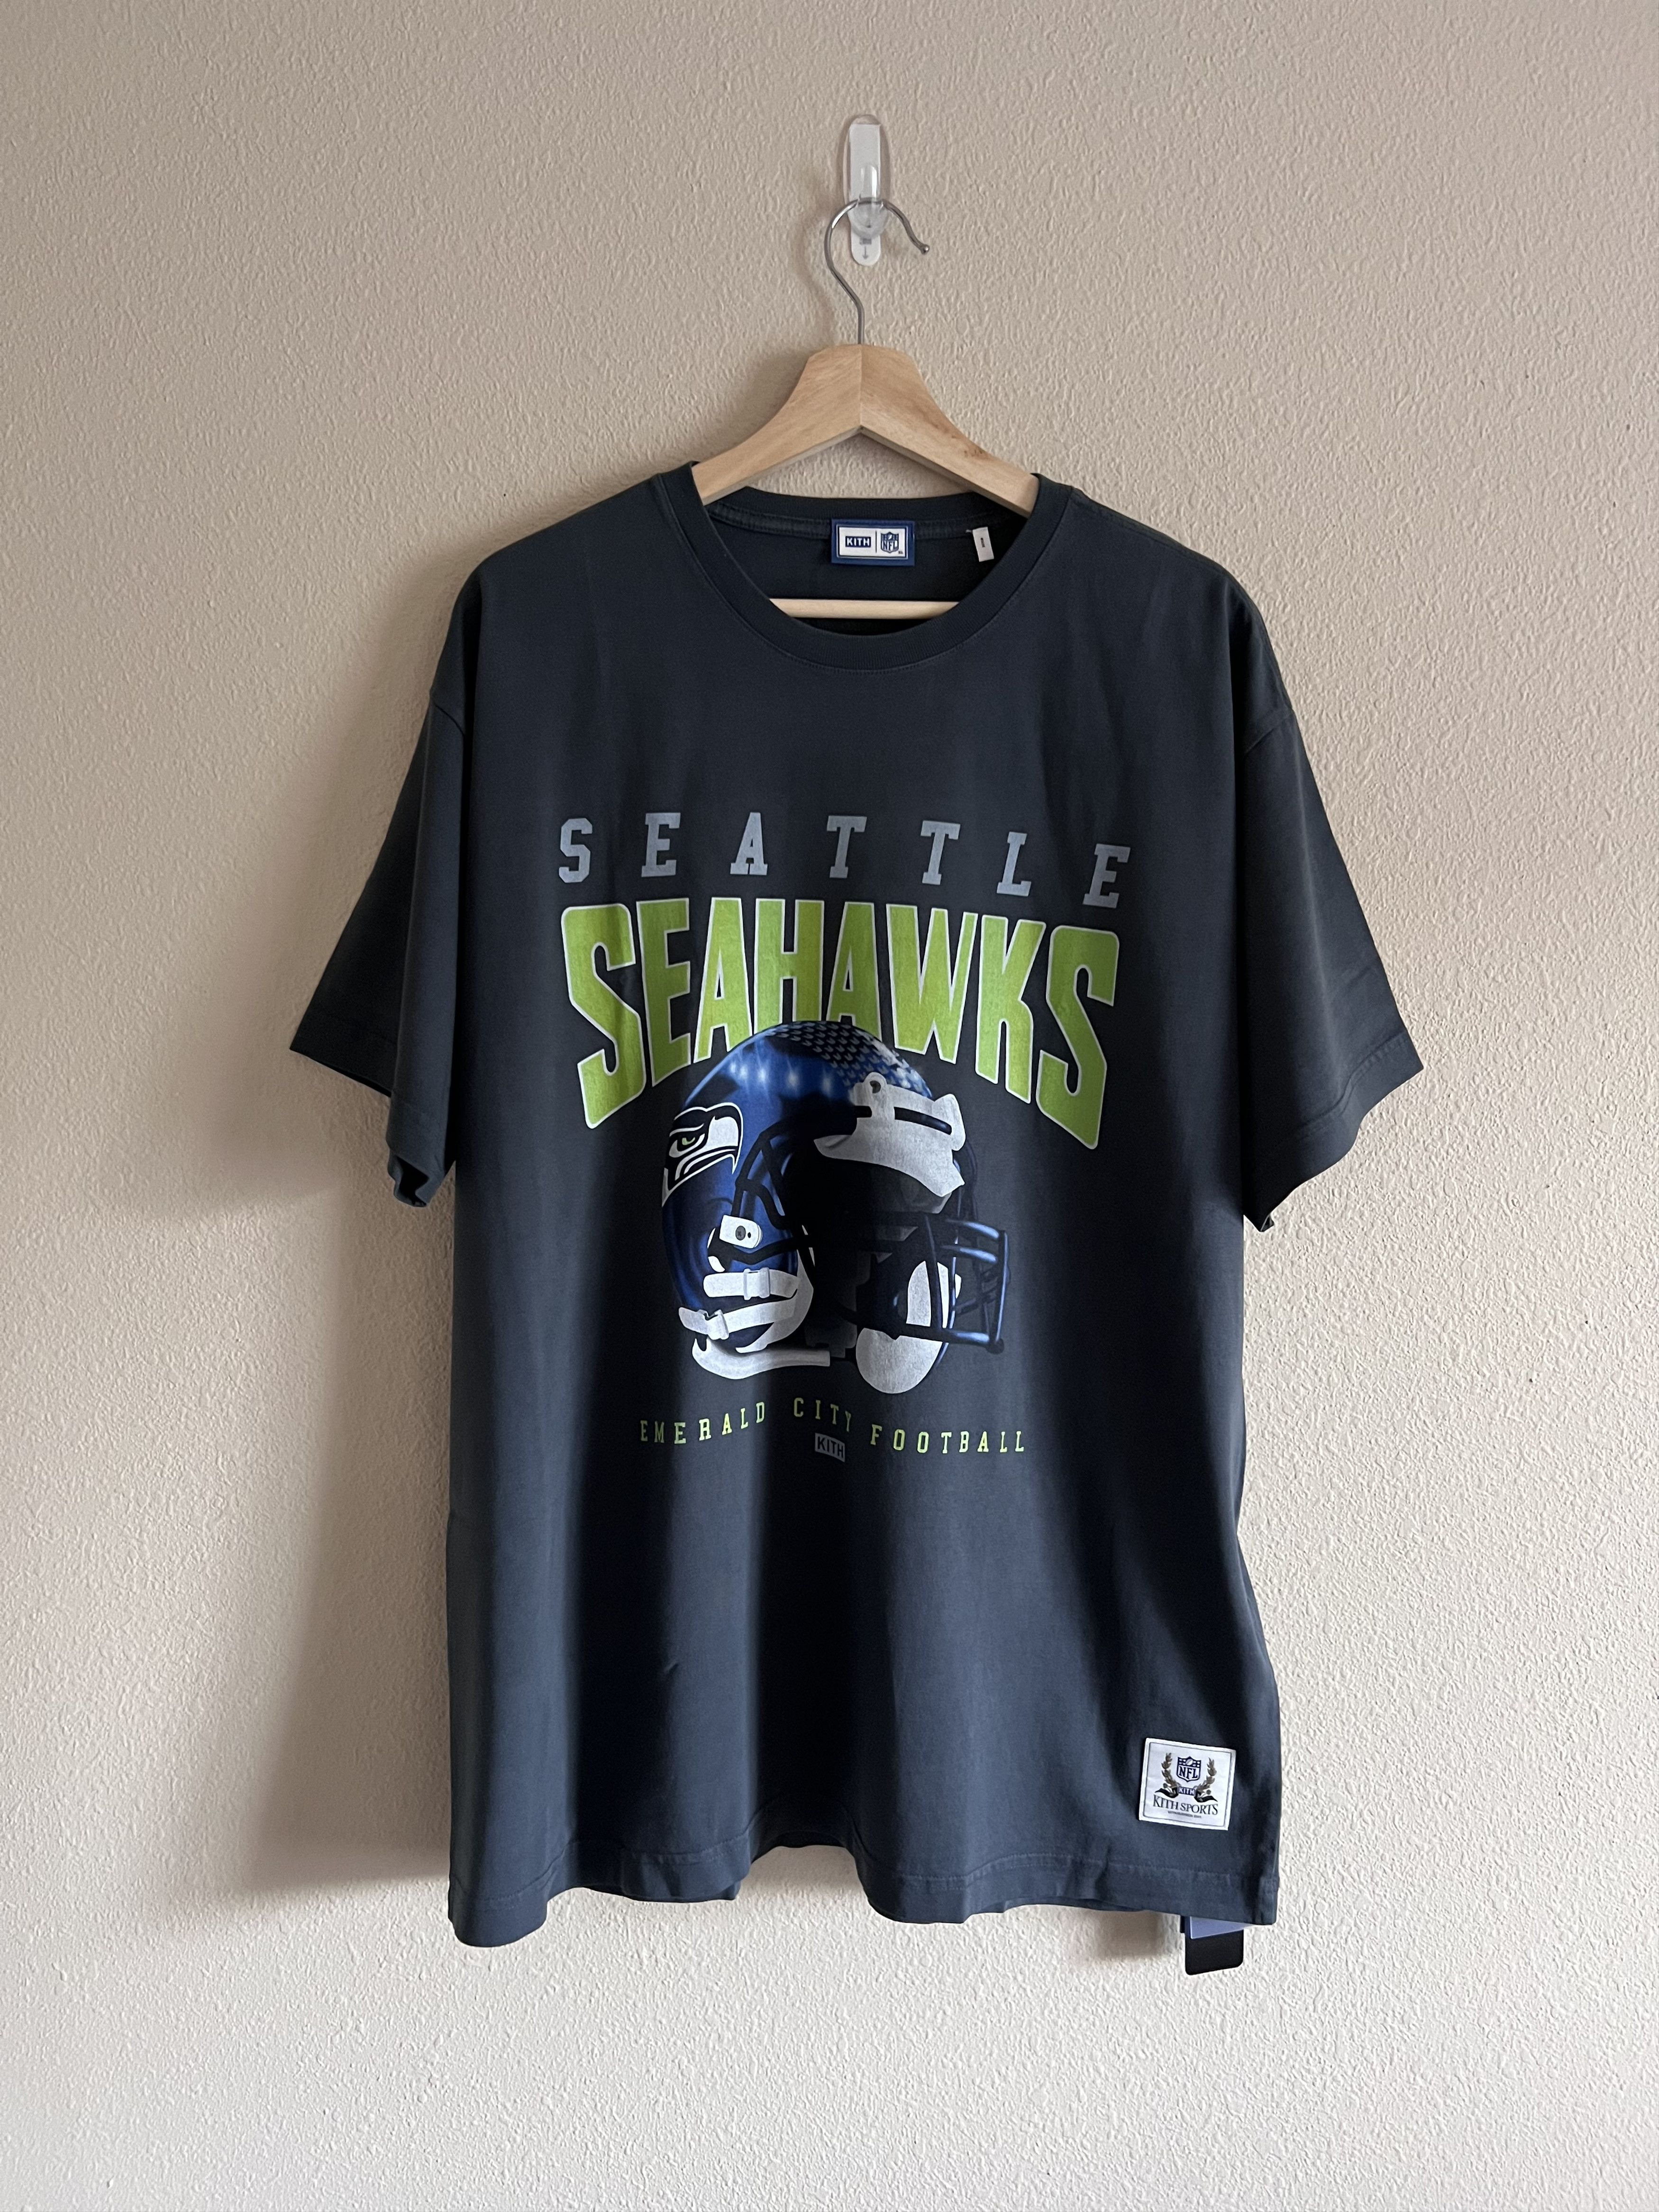 Kith for The NFL: Titans Vintage Tee - Black S